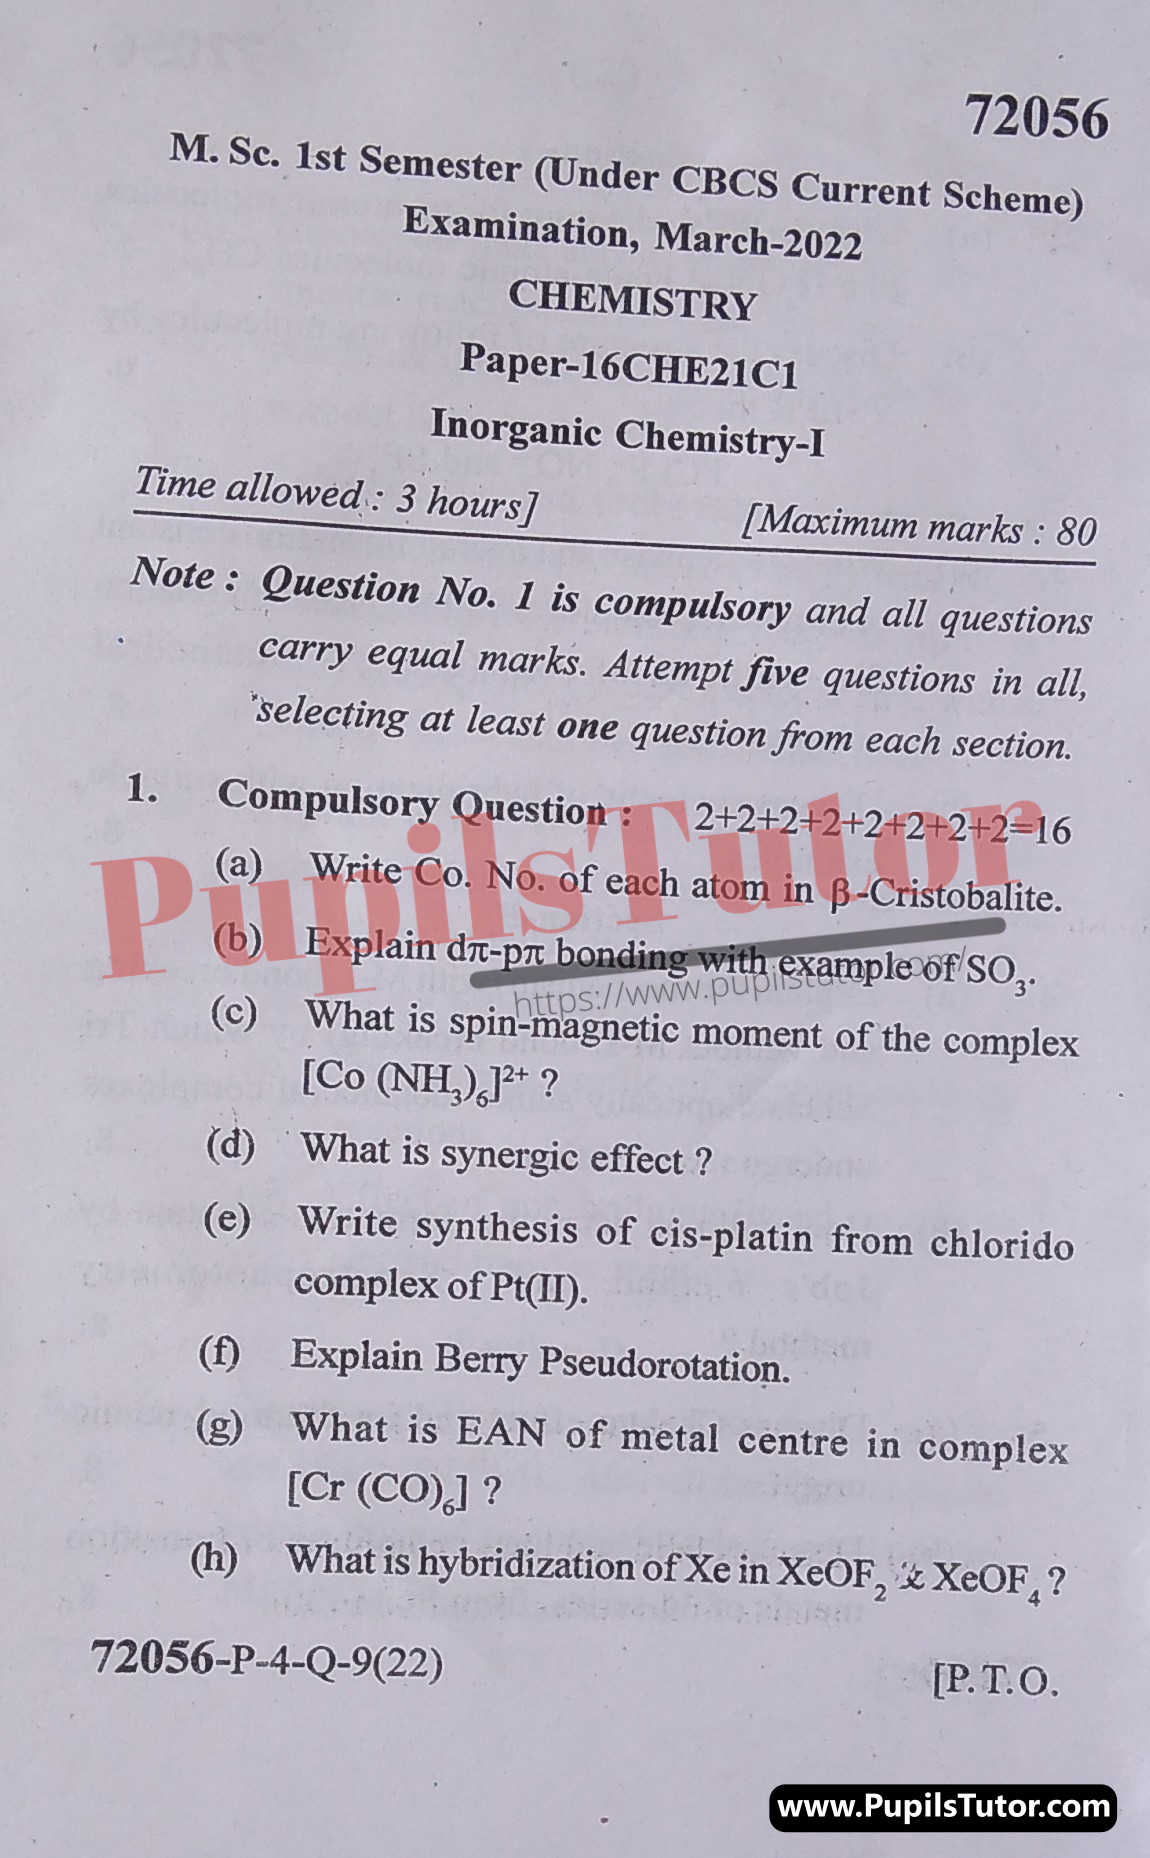 MDU (Maharshi Dayanand University, Rohtak Haryana) MSc Chemistry CBCS Scheme First Semester Previous Year Inorganic Chemistry Question Paper For March, 2022 Exam (Question Paper Page 1) - pupilstutor.com